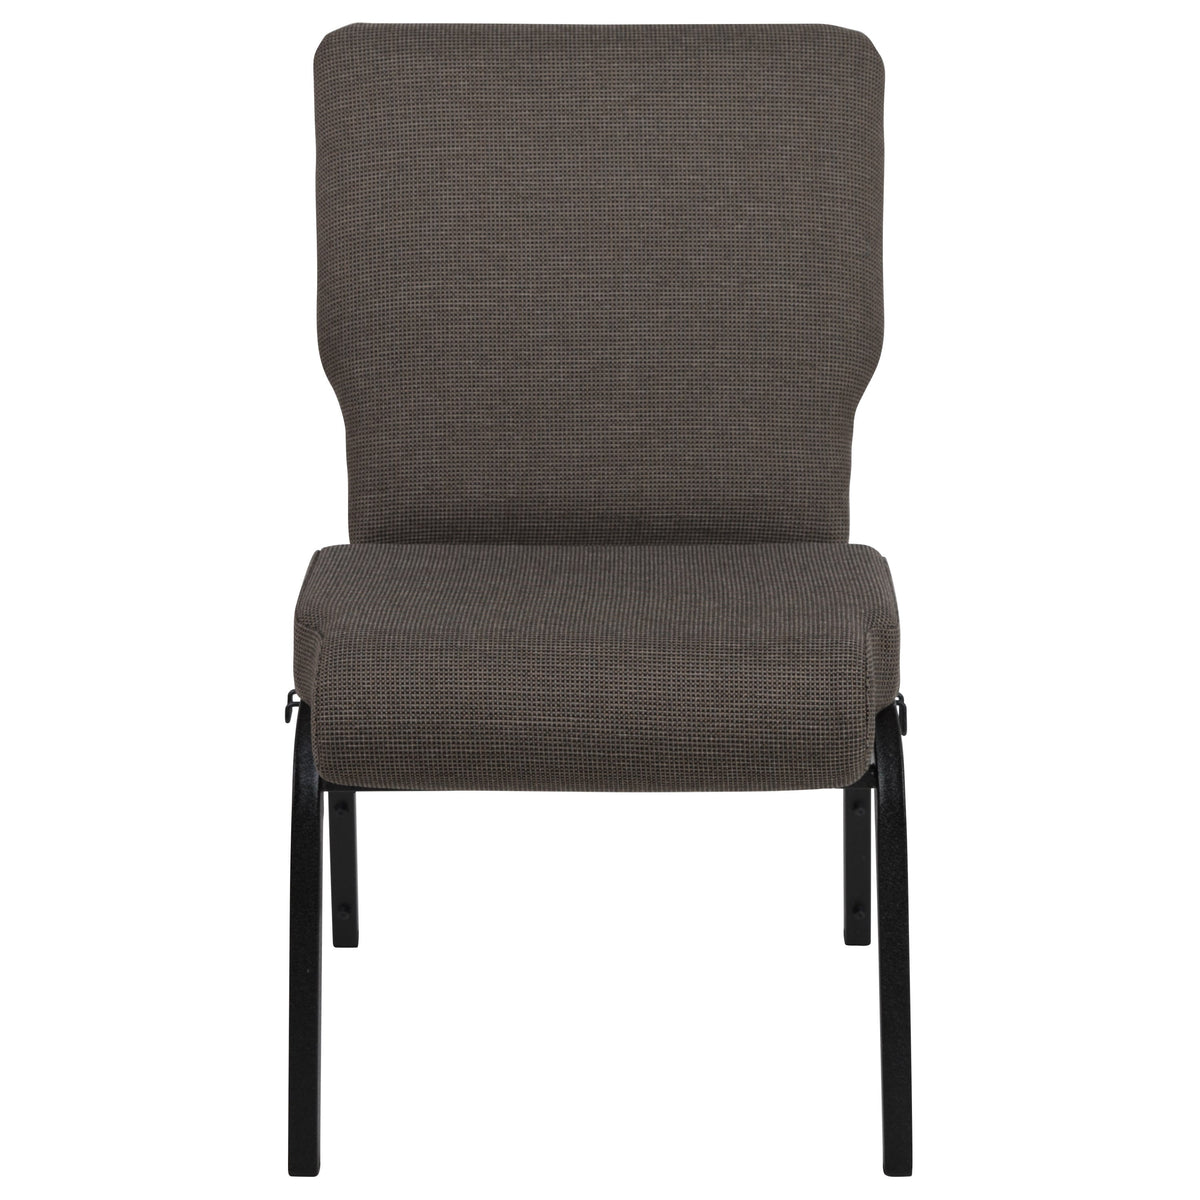 Fossil Fabric/Black Frame |#| 20.5inch Fossil Molded Foam Stacking Church Chair